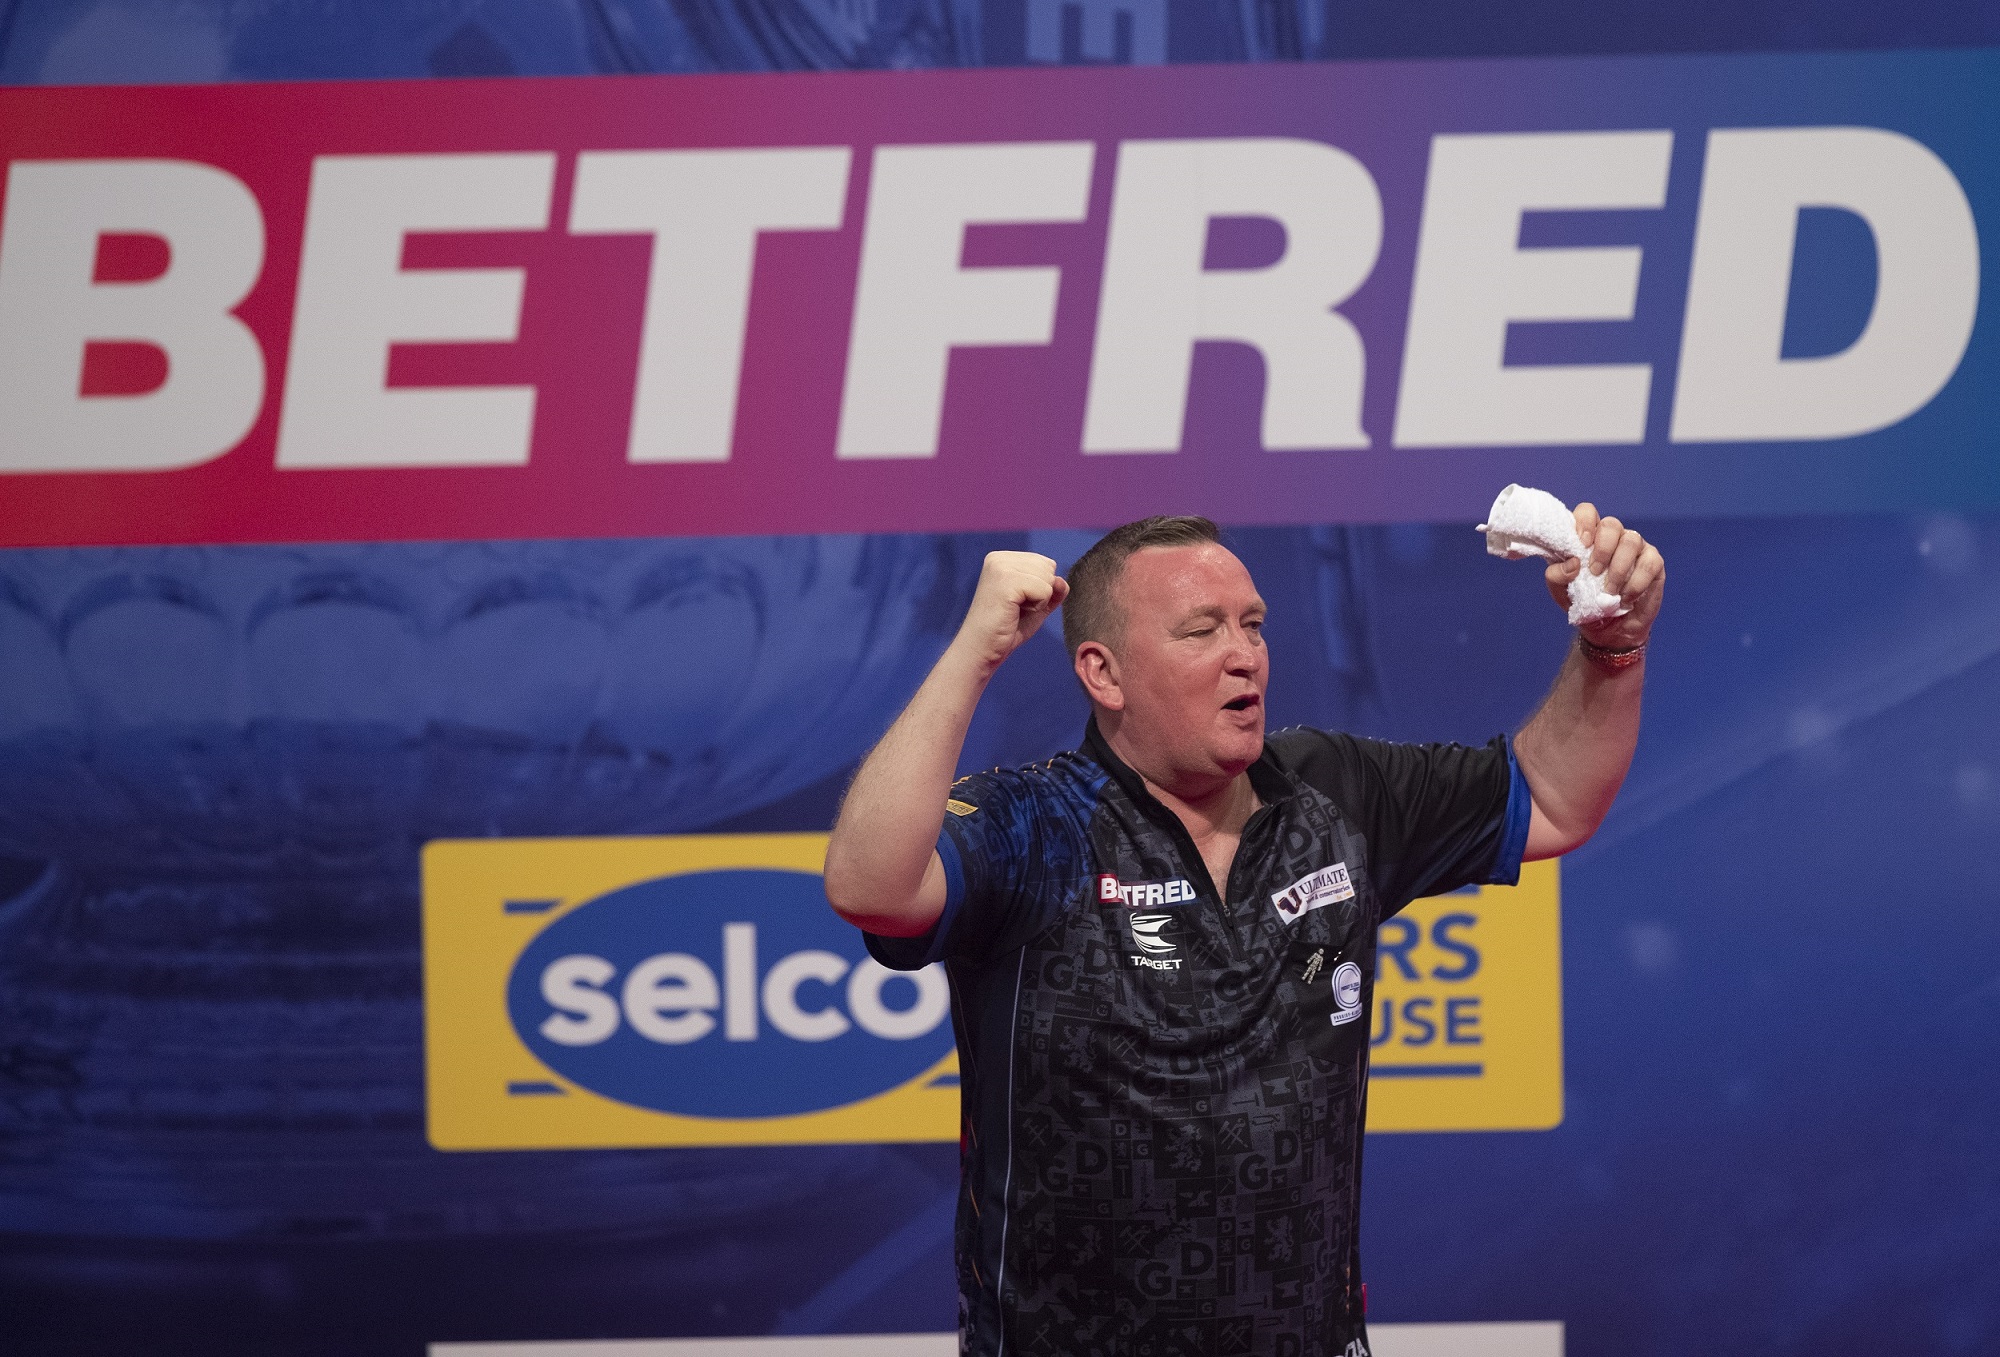 Durrant beats Wright on day five of World Matchplay